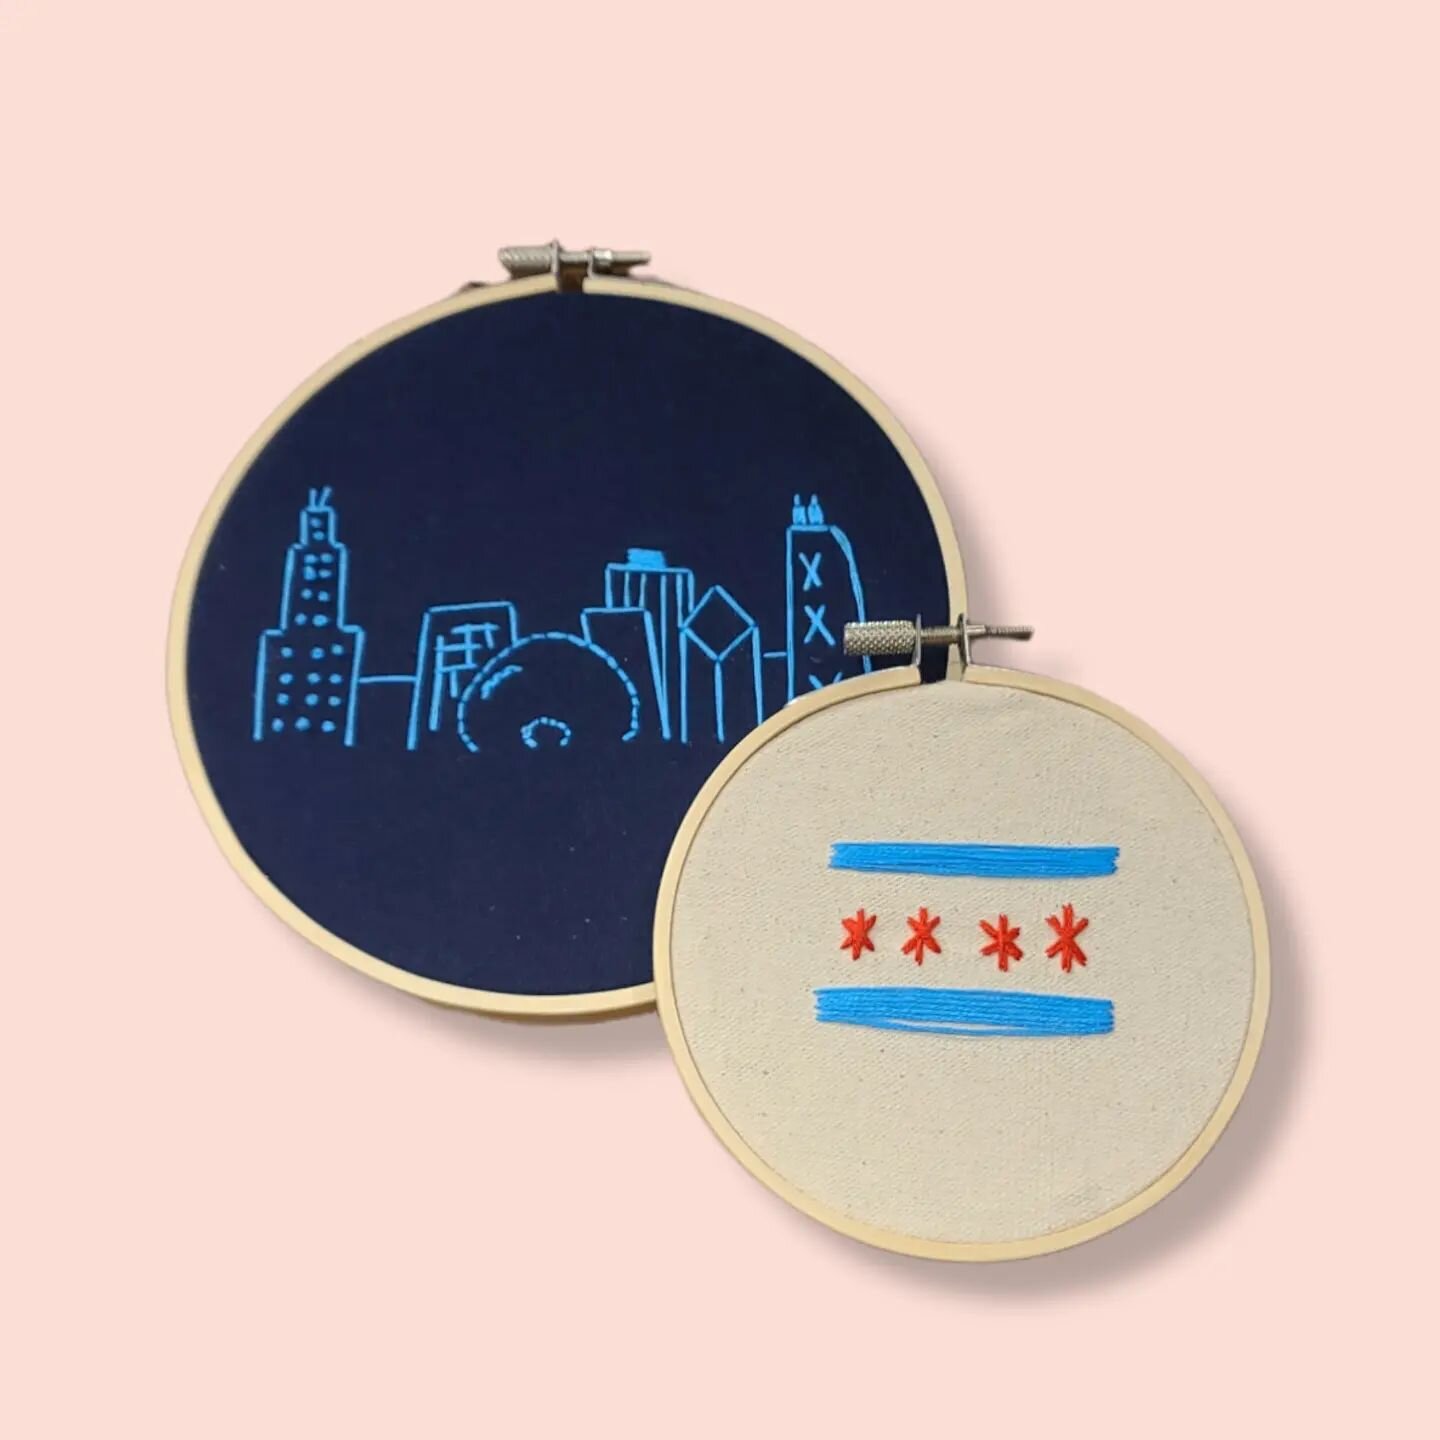 Very cool handmade souvenirs from Chicago in one shop ! 
🤍💙❤️💙🤍
#handmadeinchicago #handmade #chicago #embroidery #giftshop #giftsforeveryone #Chi